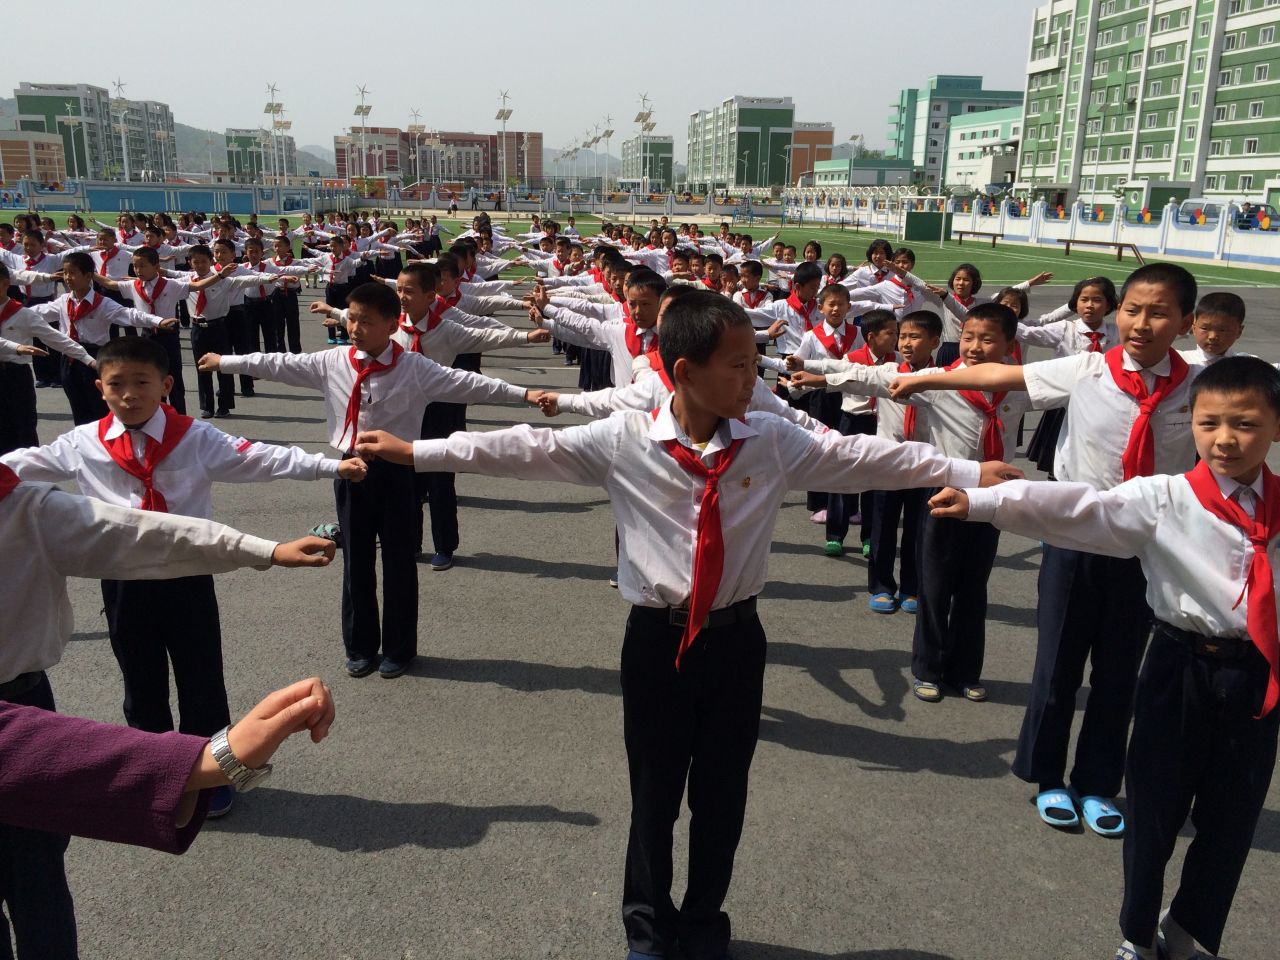 Outdoor exercise accompanied by upbeat music is a daily routine for these North Korean middle school students. Classes are critiqued on their coordination.   